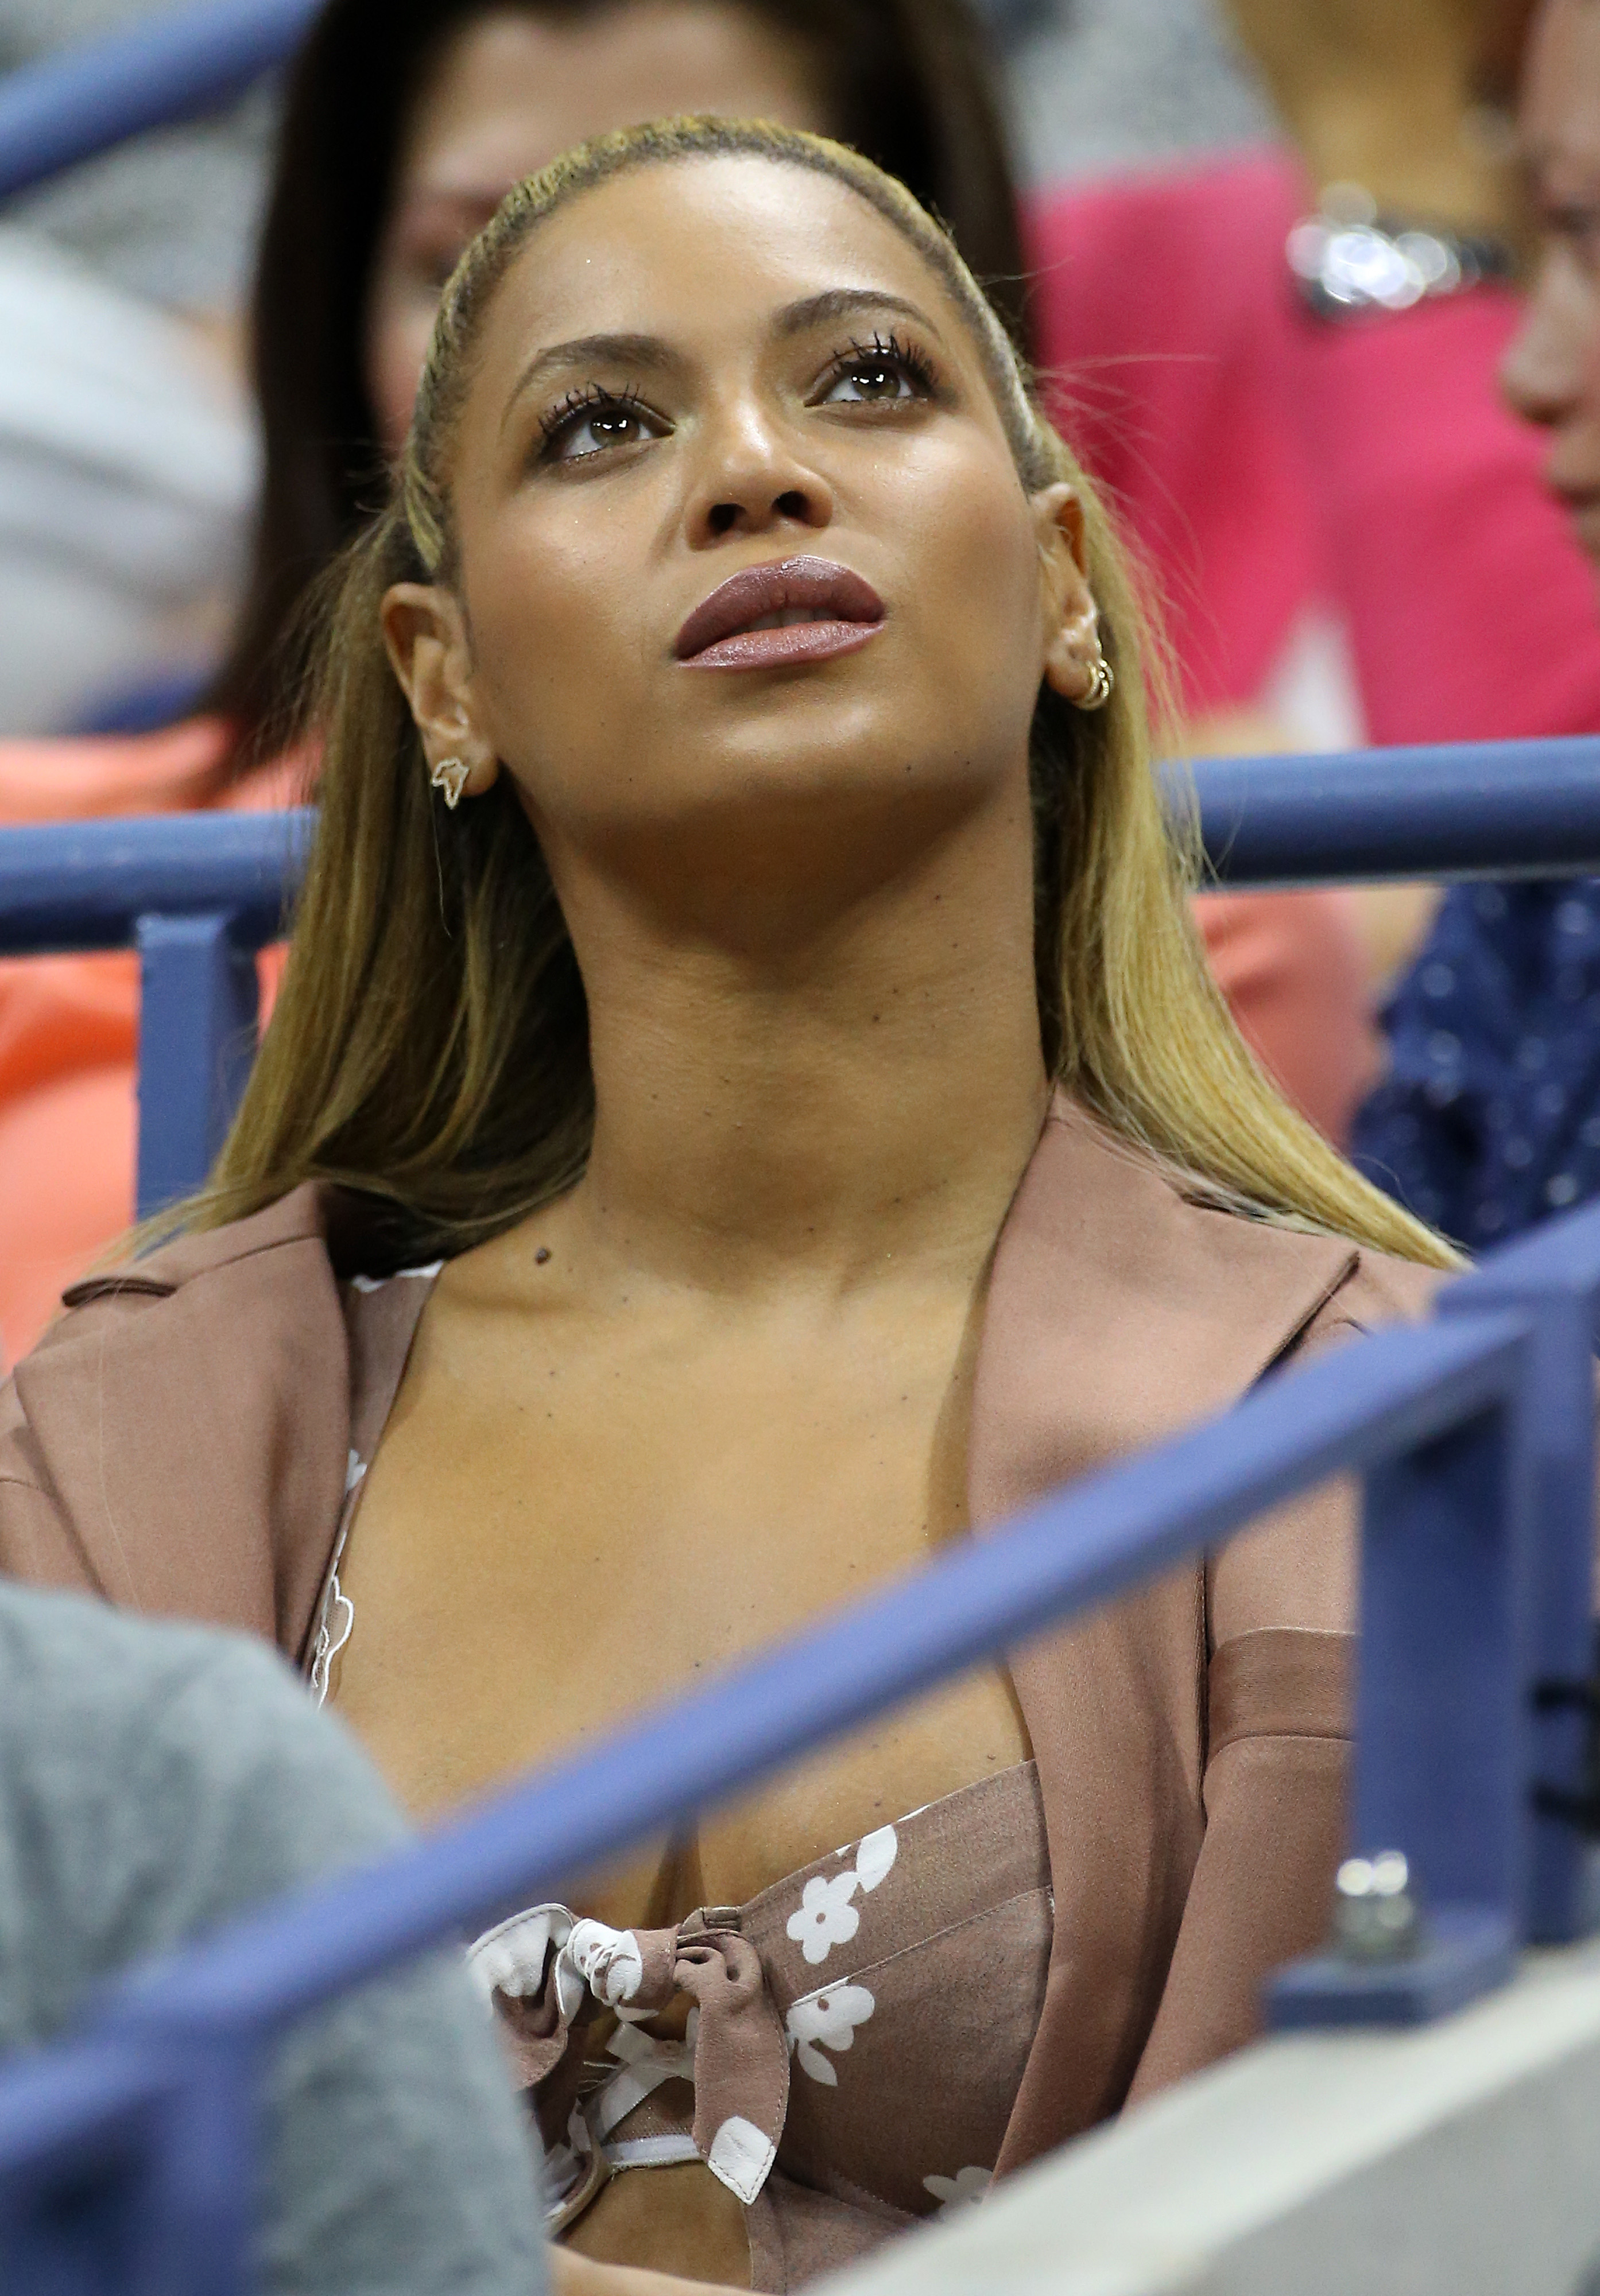 Beyoncé sitting, looking up, wearing a v-neck top with bow detail, at an indoor event